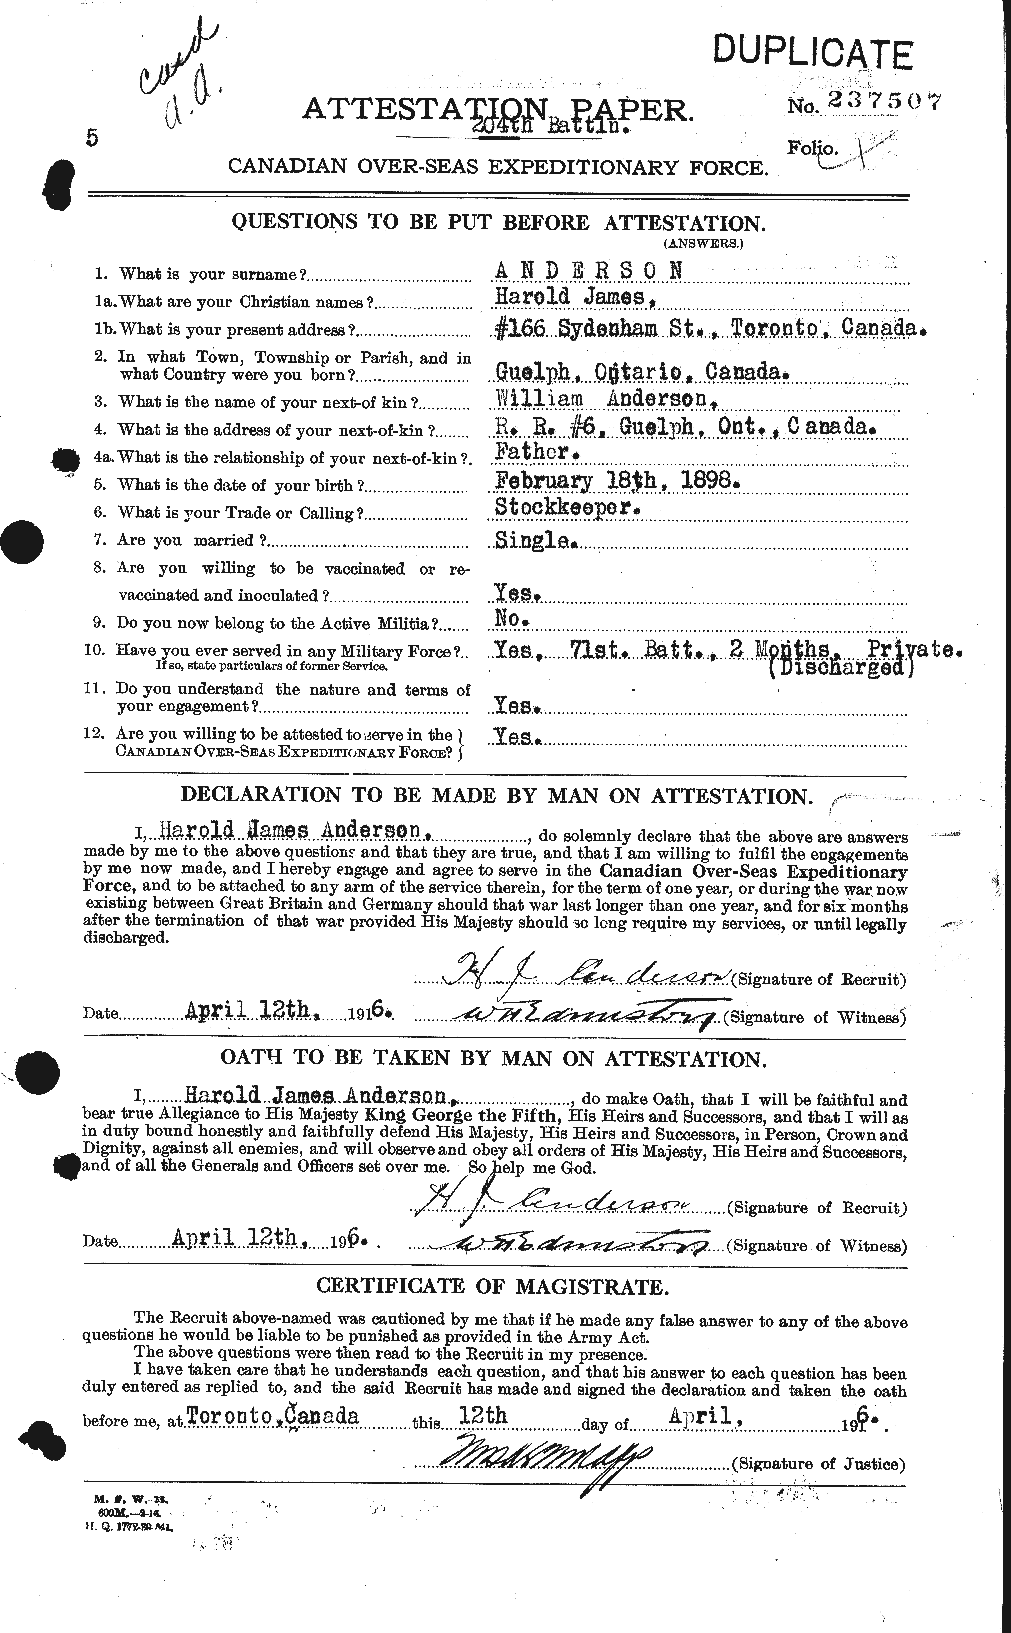 Personnel Records of the First World War - CEF 213286a